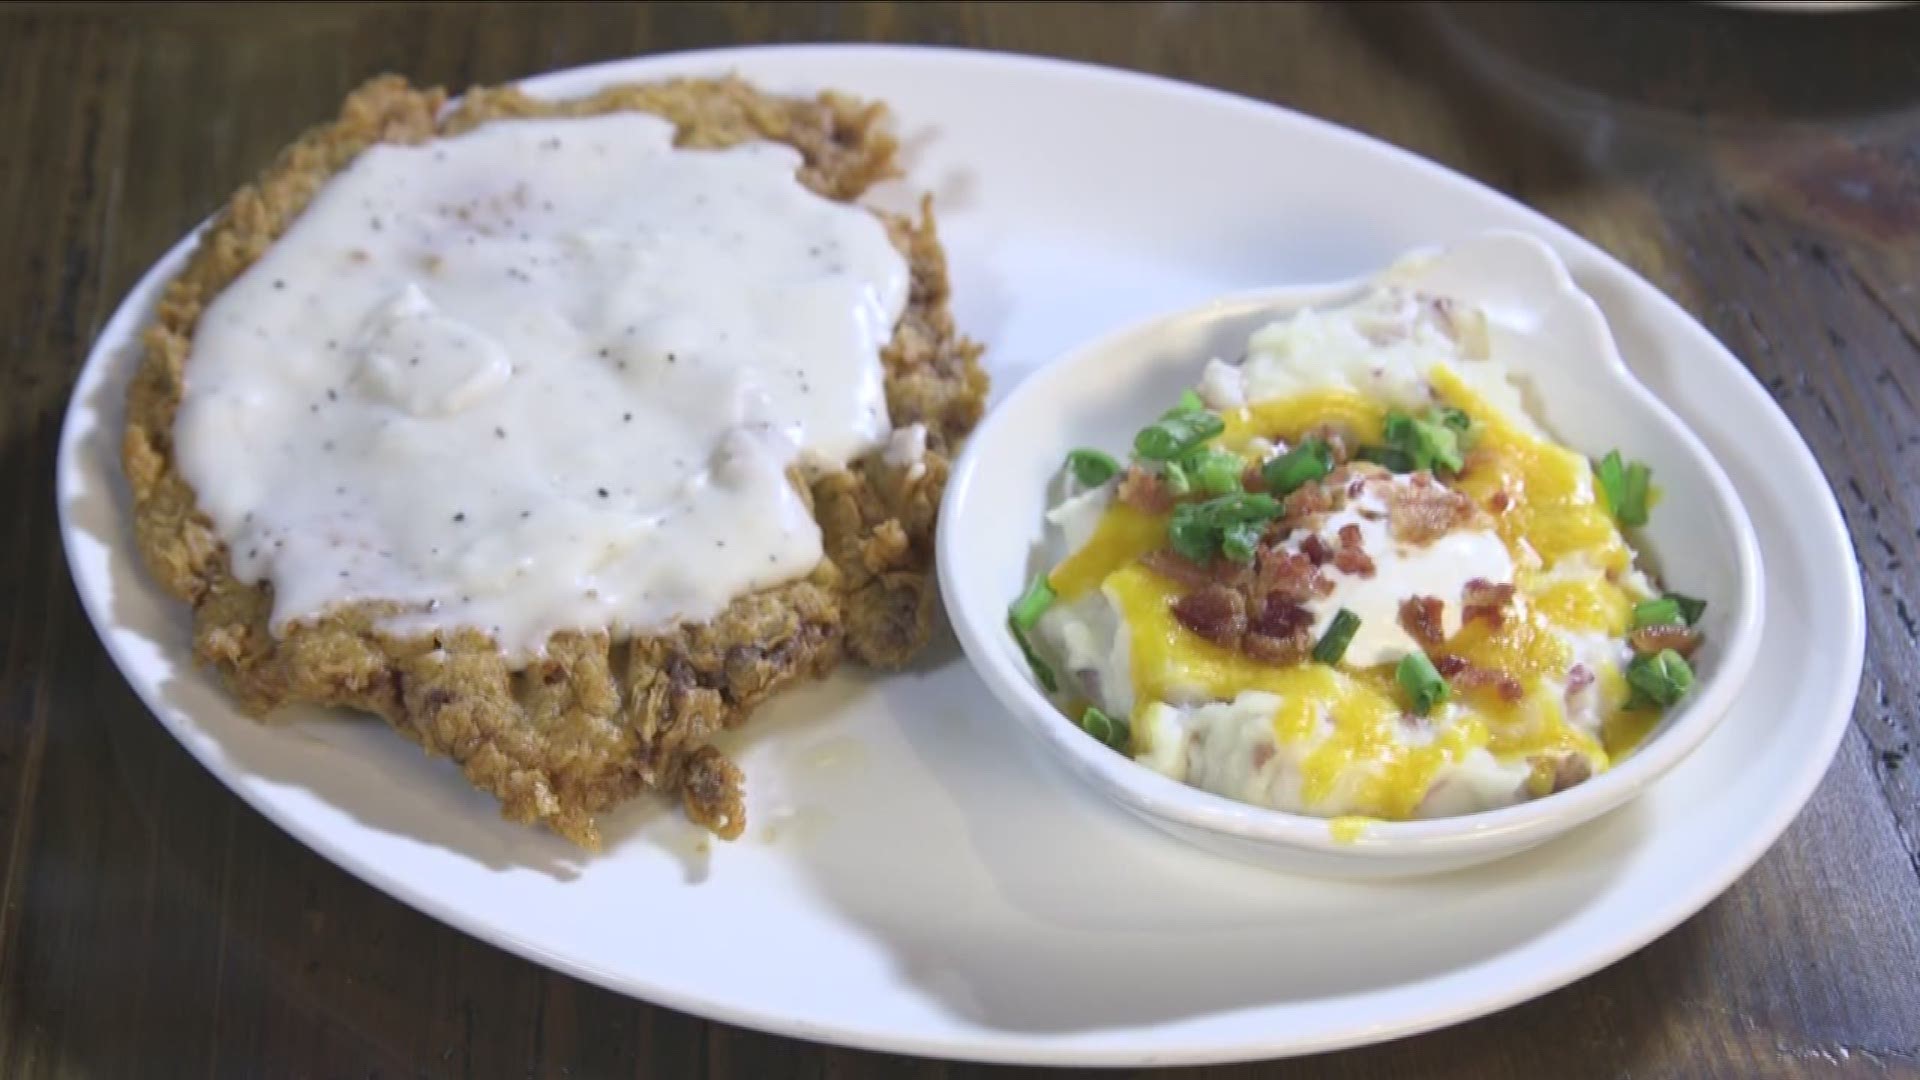 The Wood Fired Grill features some its most popular dishes, like the Chicken Fried Steak!